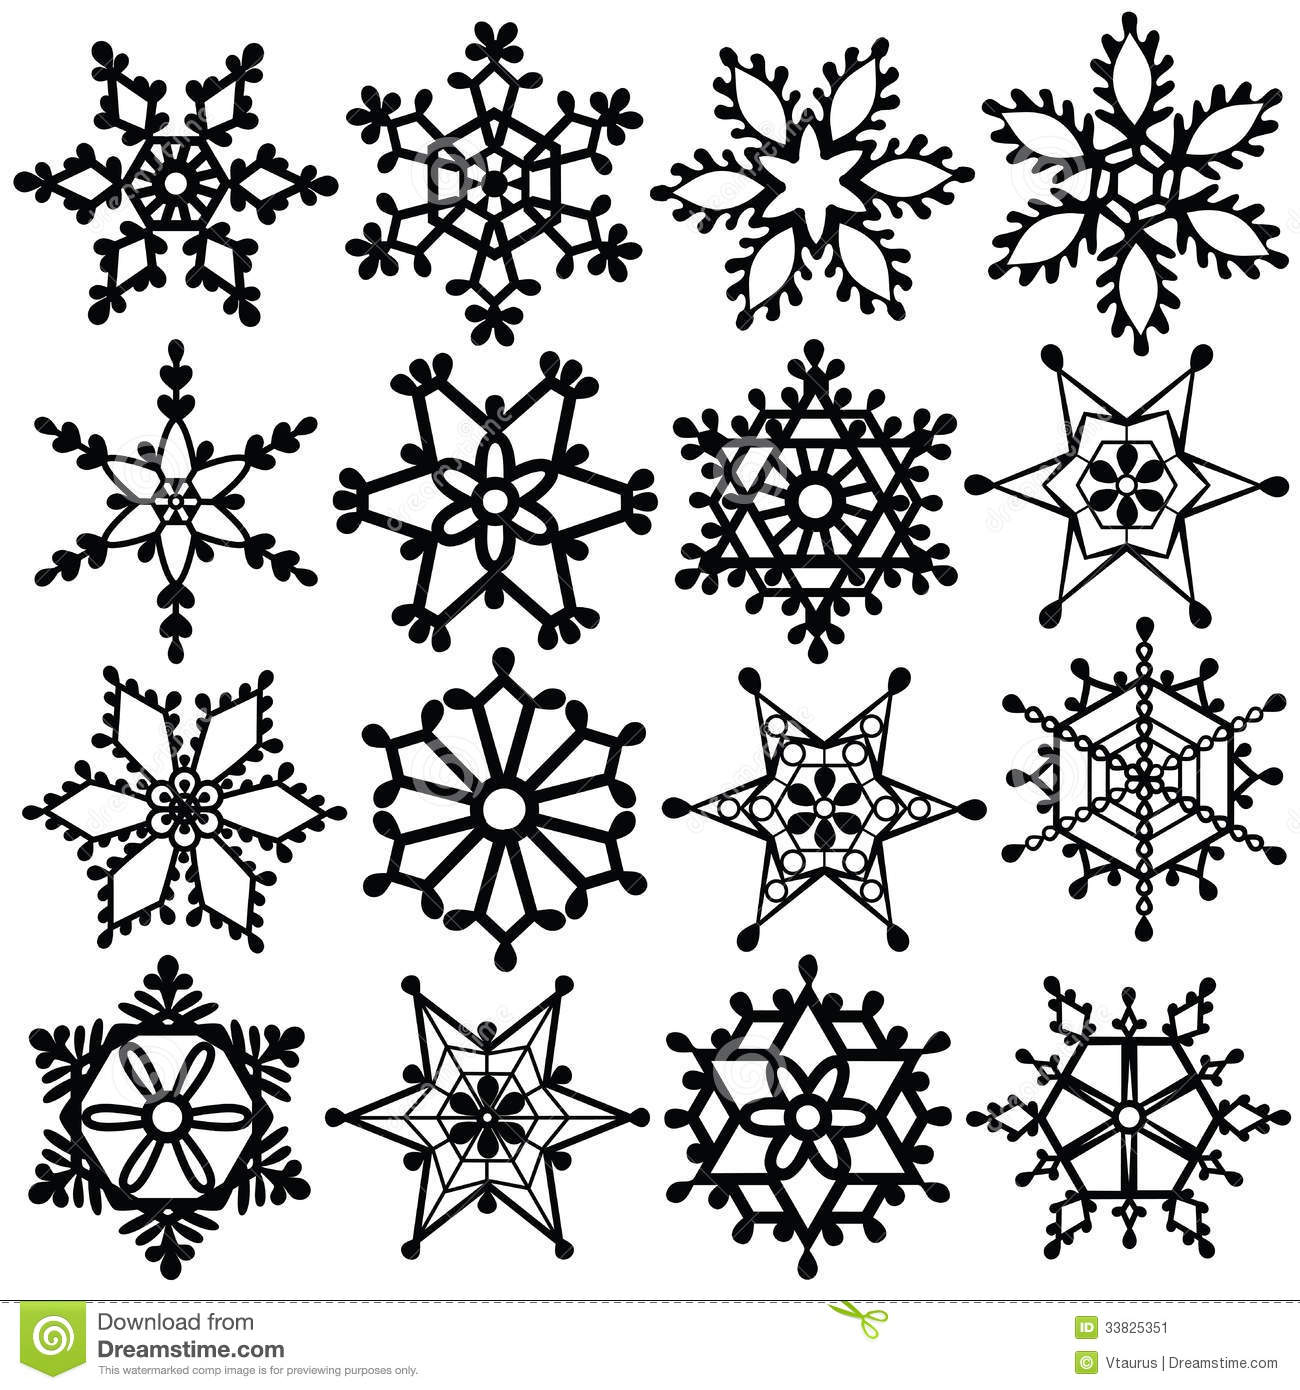 Clipart snowflake black and white 